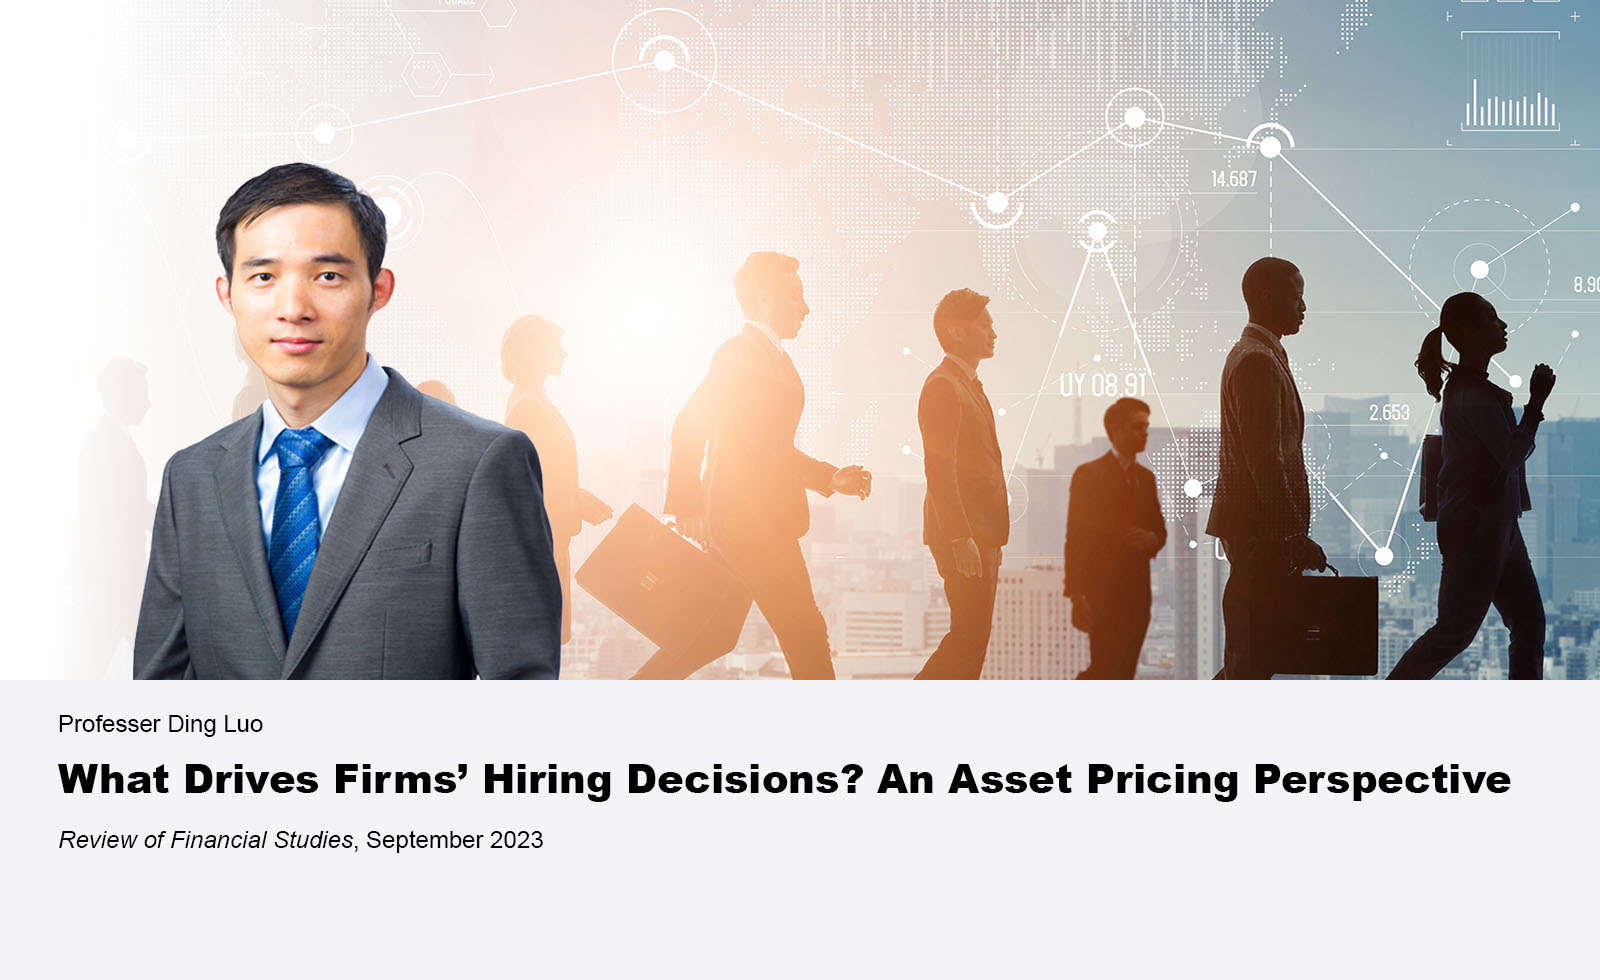 What Drives Firms’ Hiring Decisions? An Asset Pricing Perspective